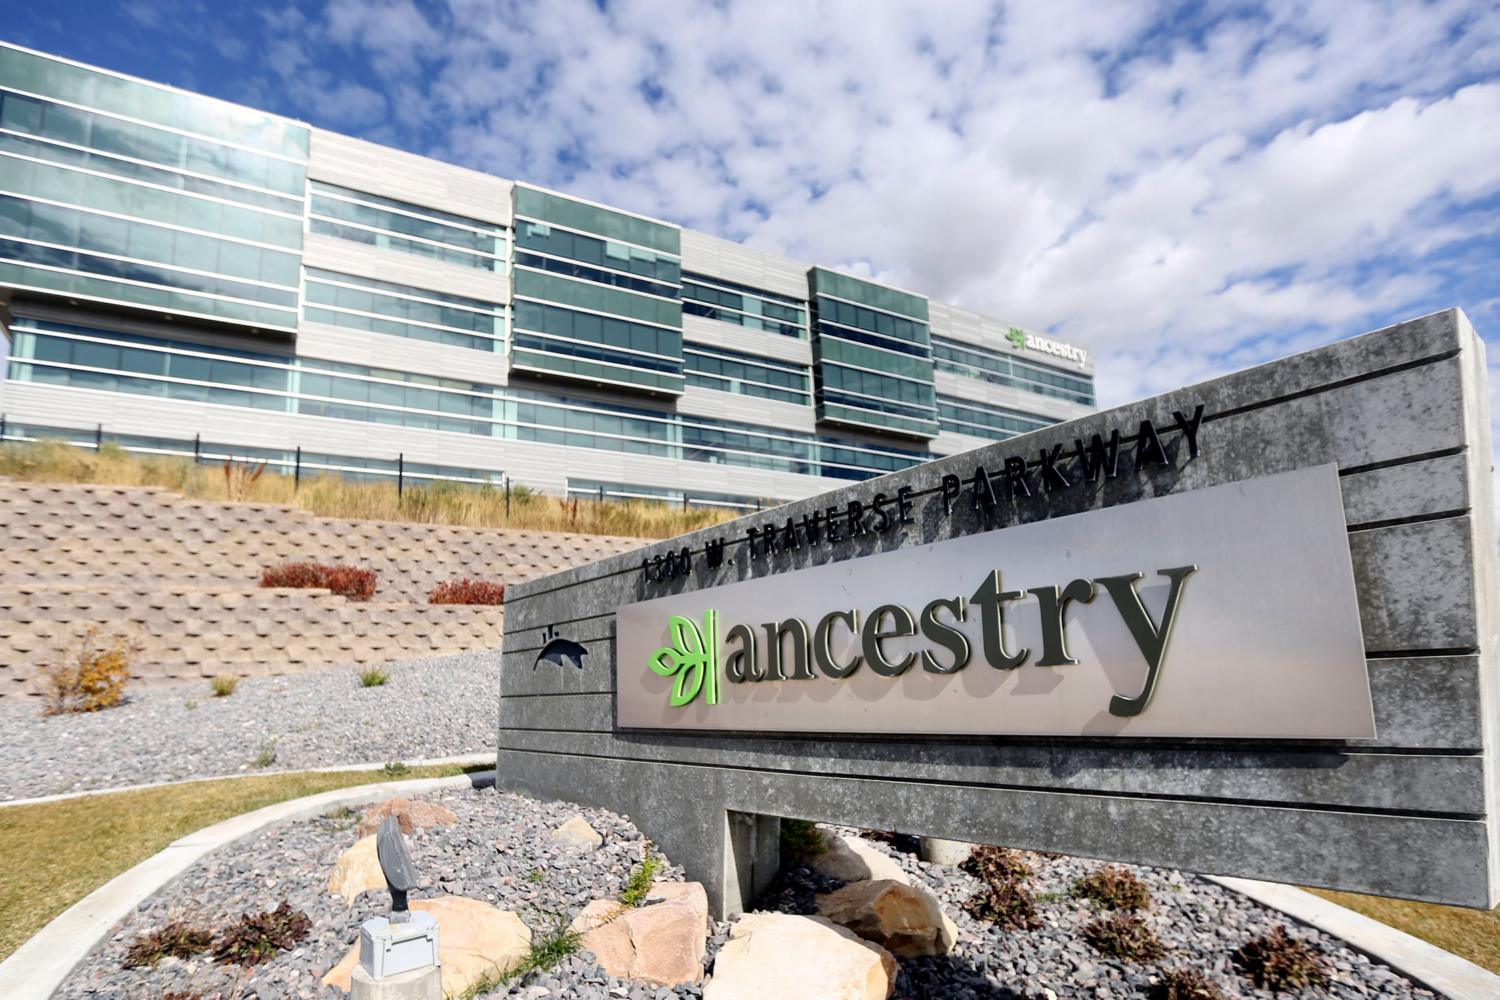 Ancestry's office building in Lehi. | Photo by Kristin Murphy, Deseret News